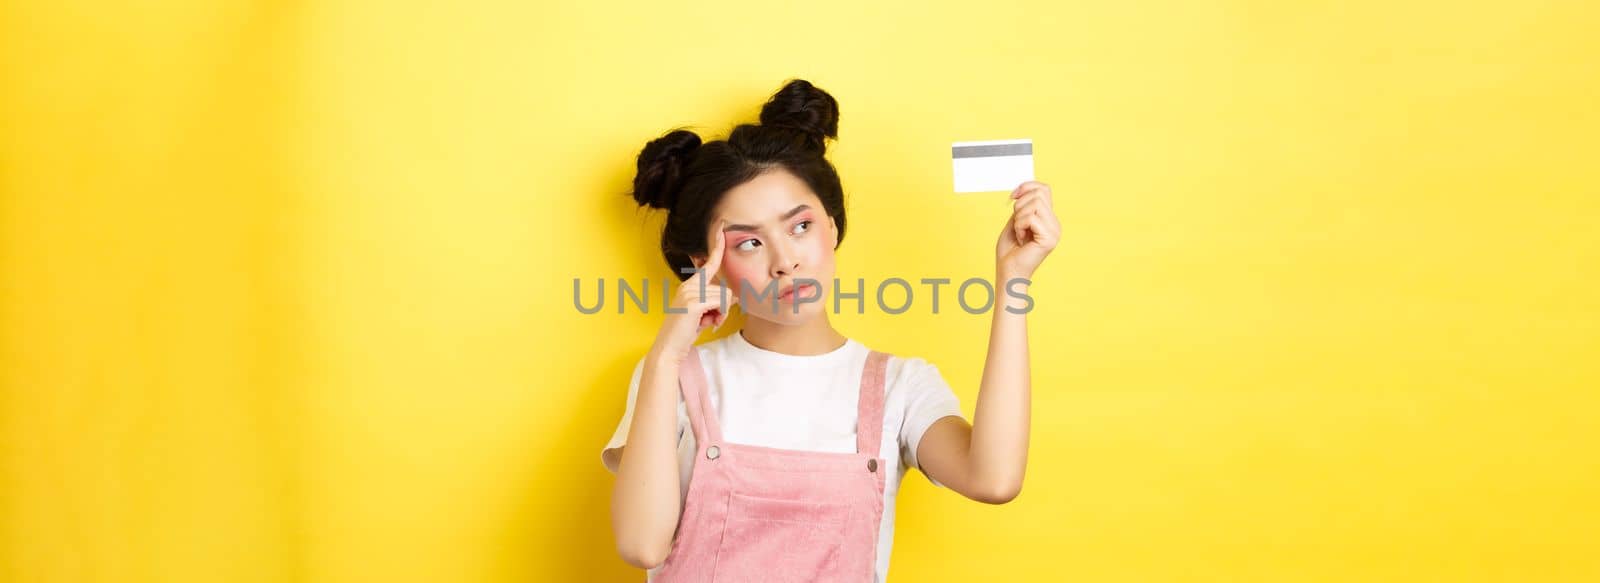 Shopping. Thoughtful trendy girl with summer makeup, looking pensive at plastic credit card, standing on yellow background.